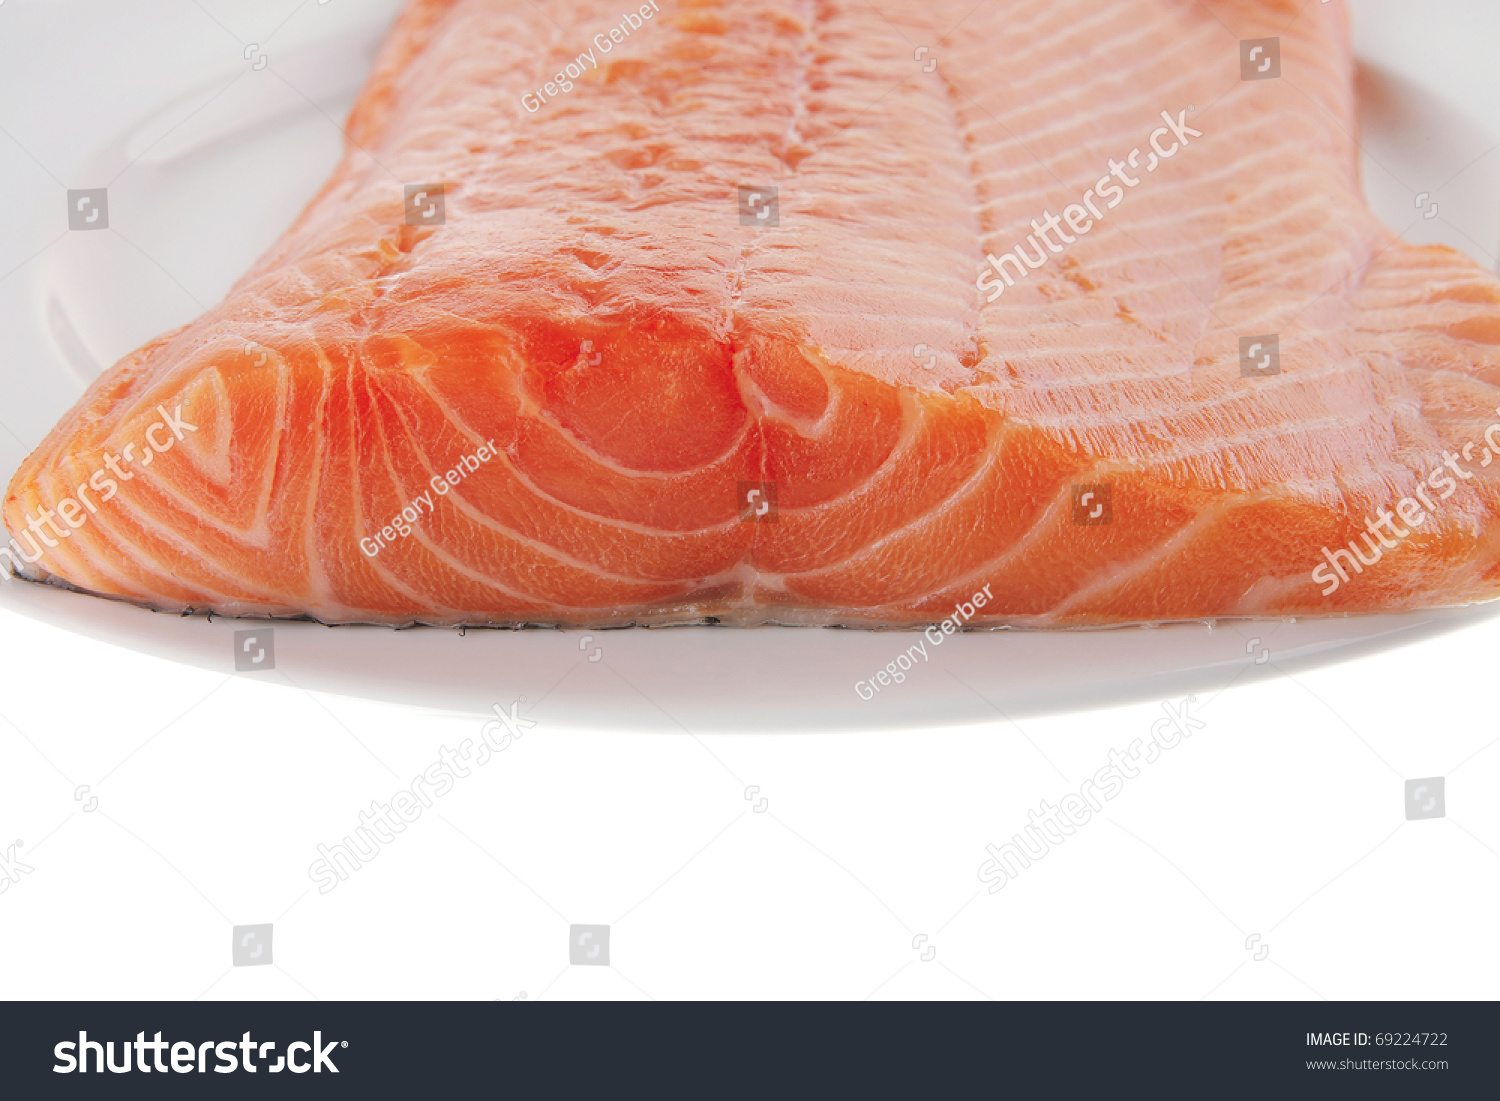 Fish Food : Fresh Raw Red Fish Fillet On White Plate Isolated On White ...